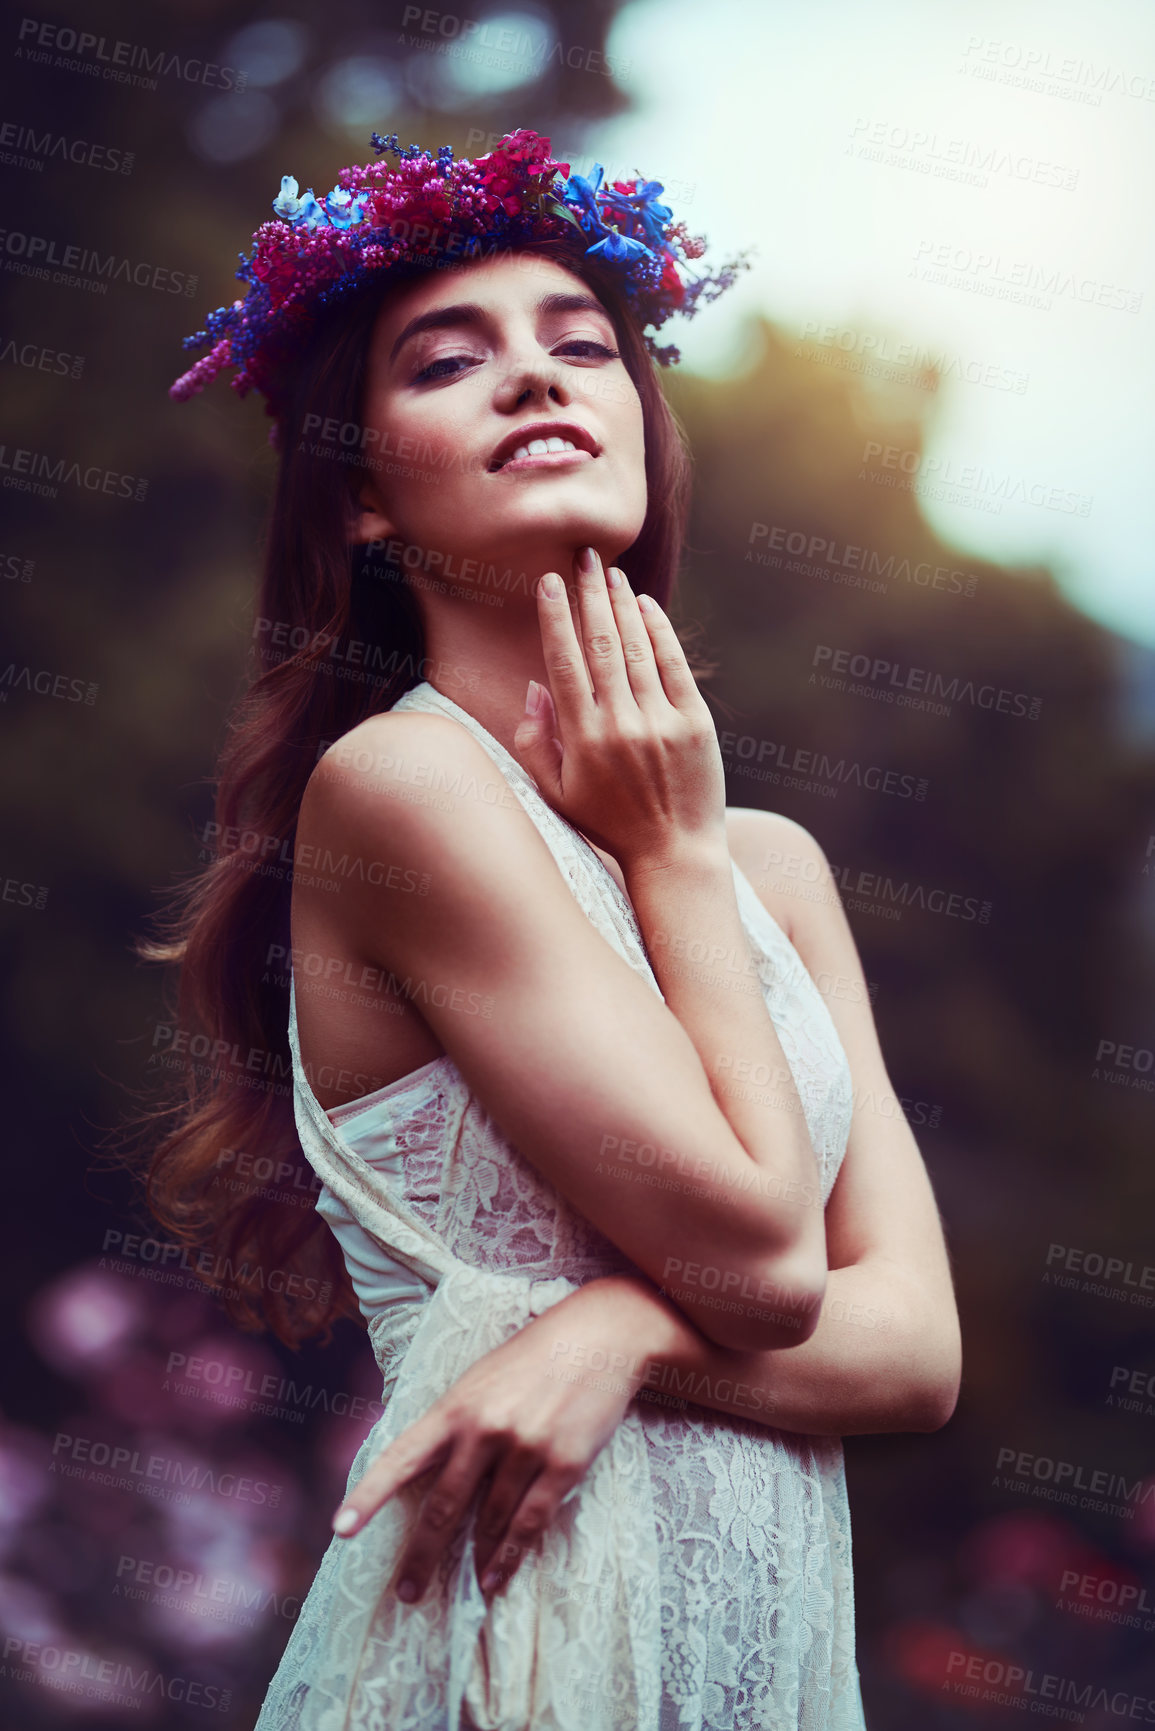 Buy stock photo Portrait of a beautiful young woman wearing a floral head wreath outdoors